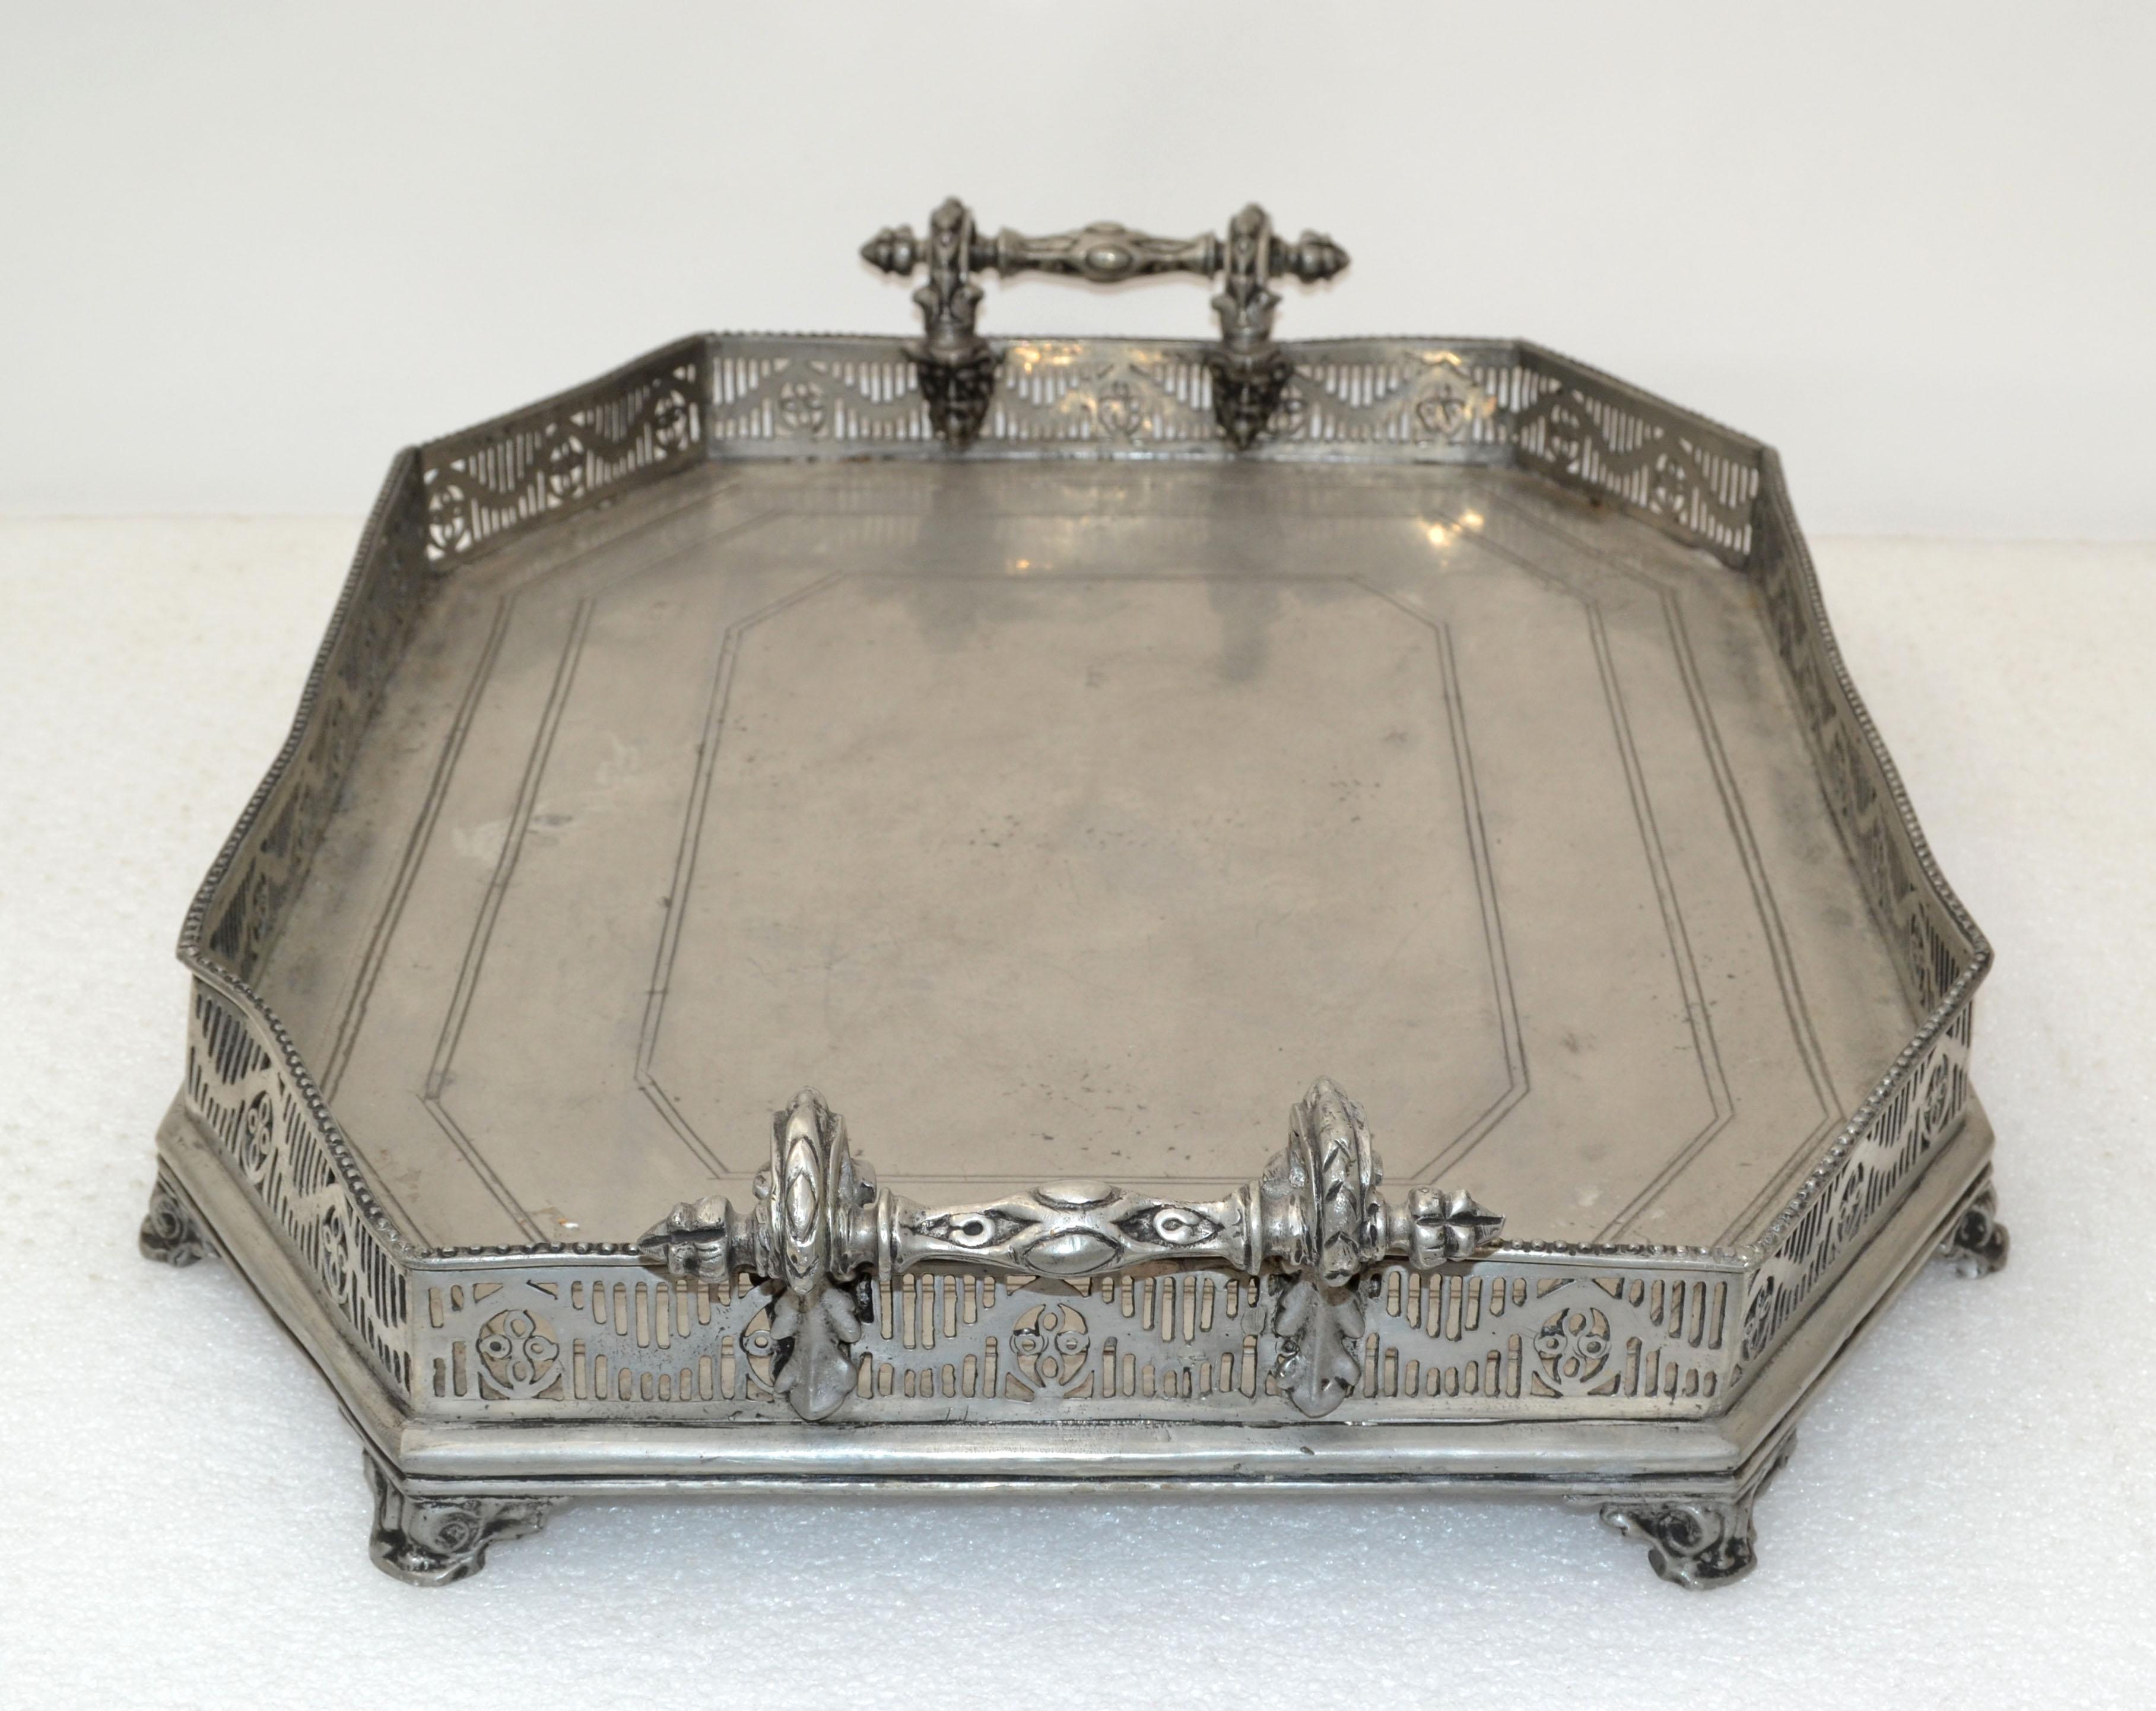 Mid-20th Century Spanish Silver Ornate Large Footed Serving Tray with Handles Trademark